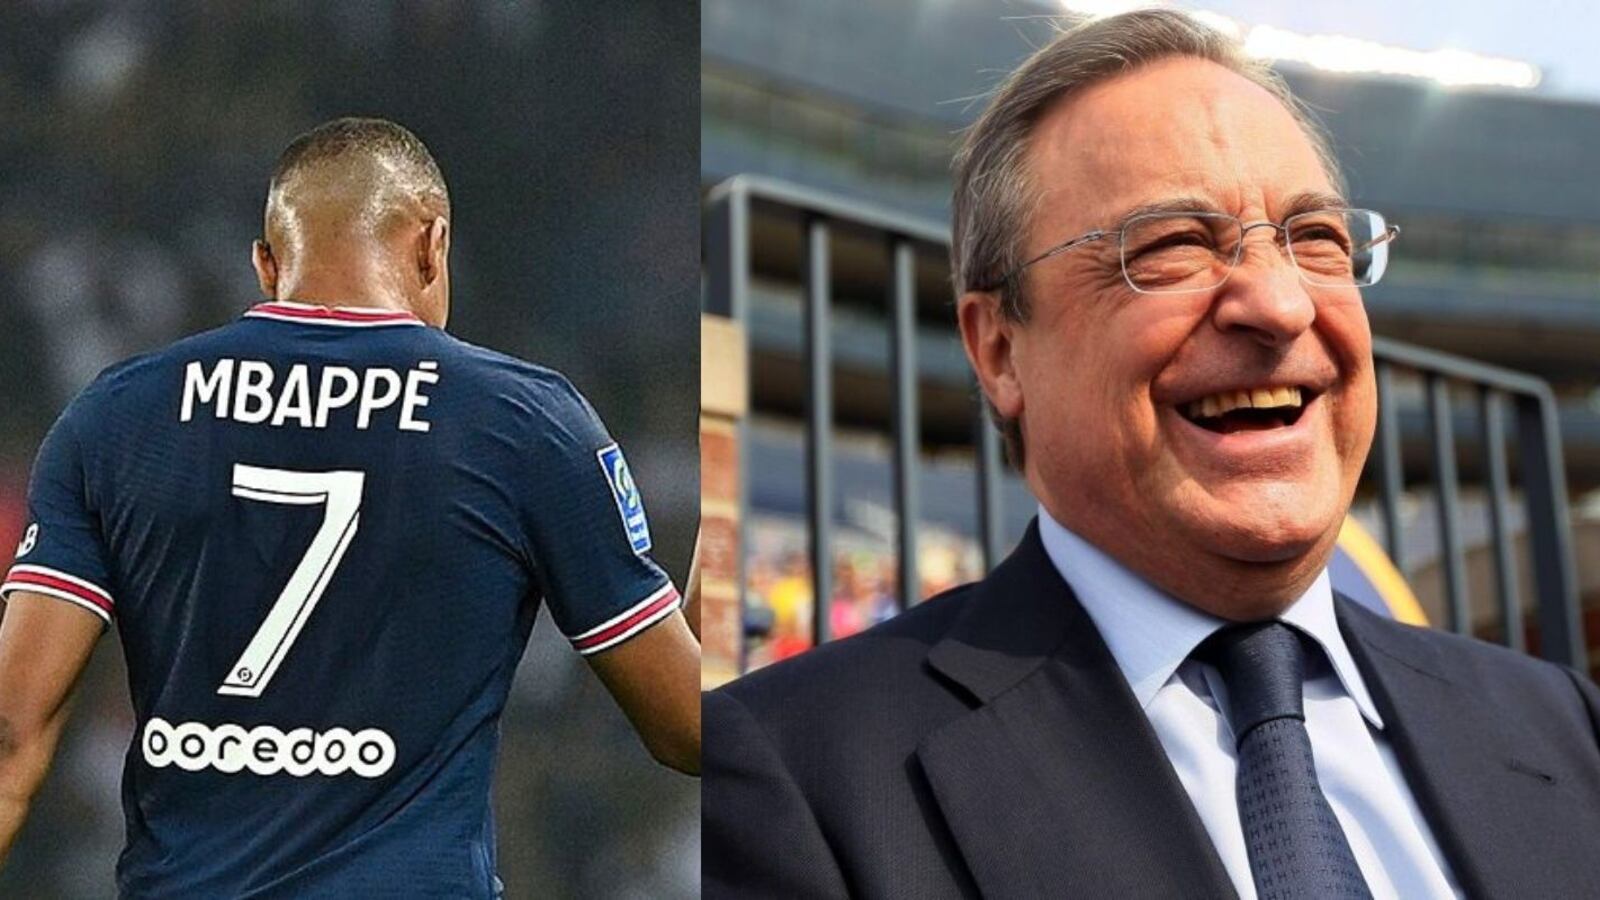 Real Madrid smiles, the controversy that involves Mbappé and distances him from PSG